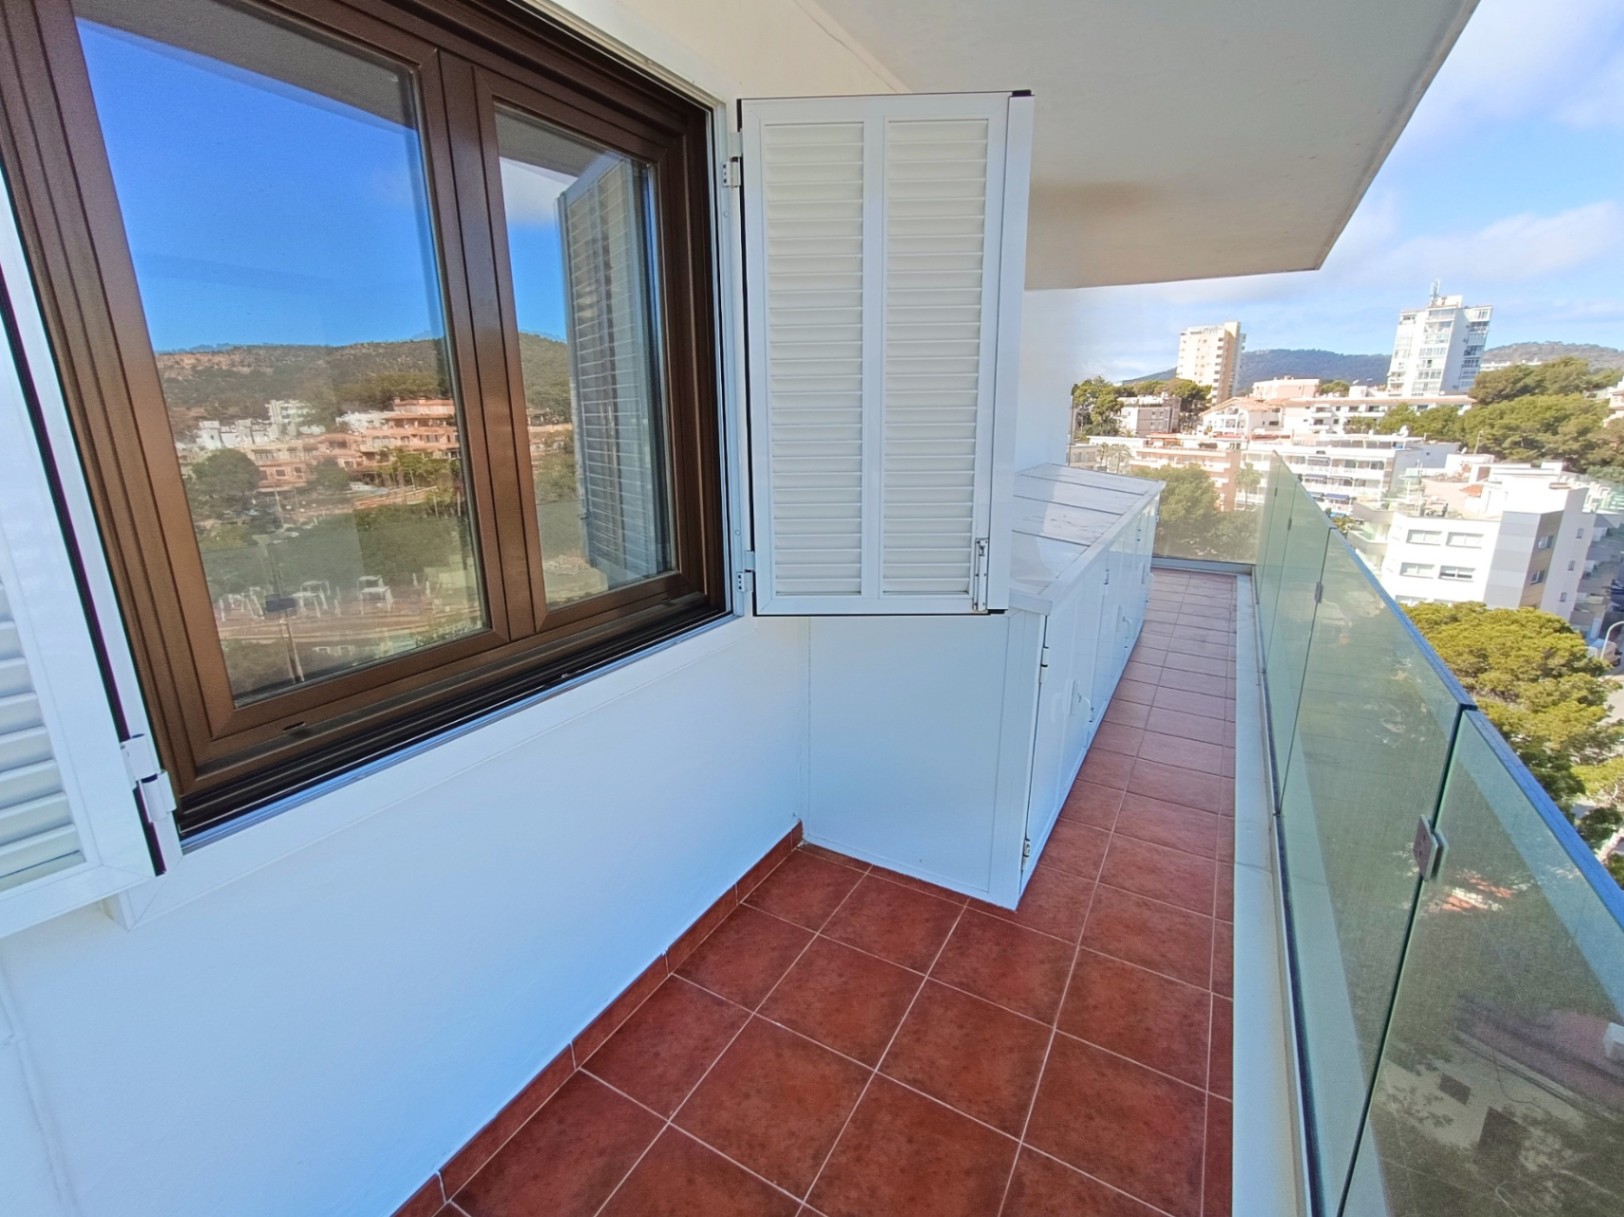 Dream apartment in Palmanova just a stone's throw from the sea!